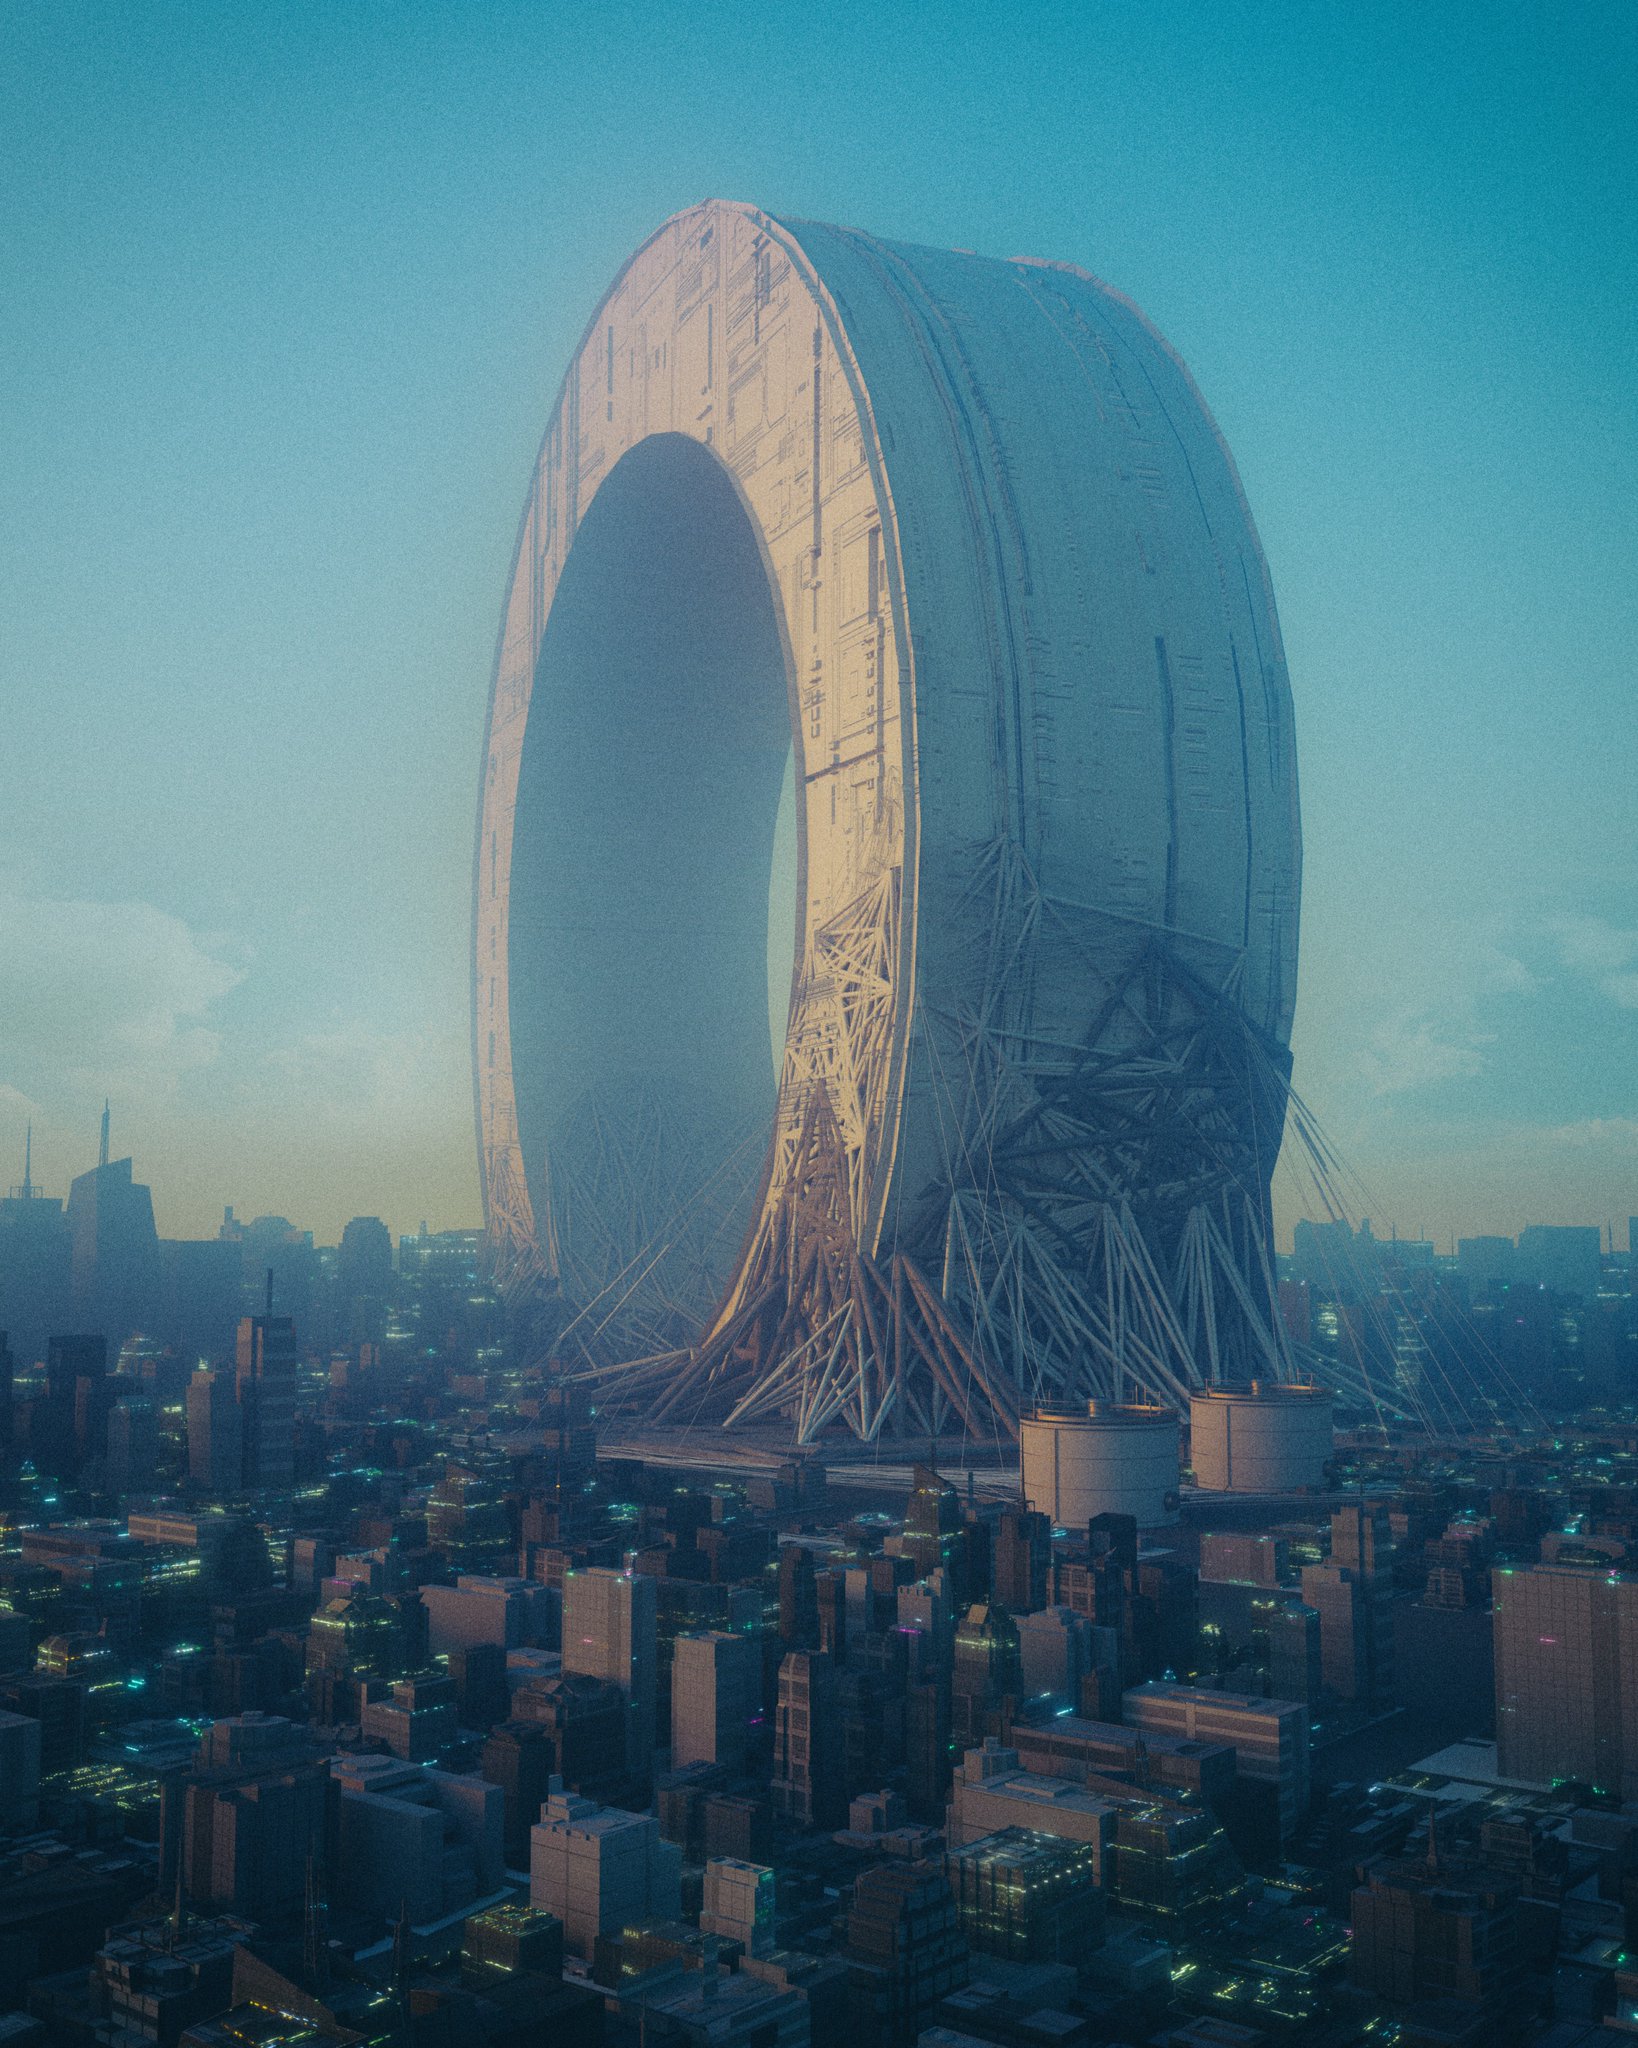 Awesome pic of a circular building rising out of the ground